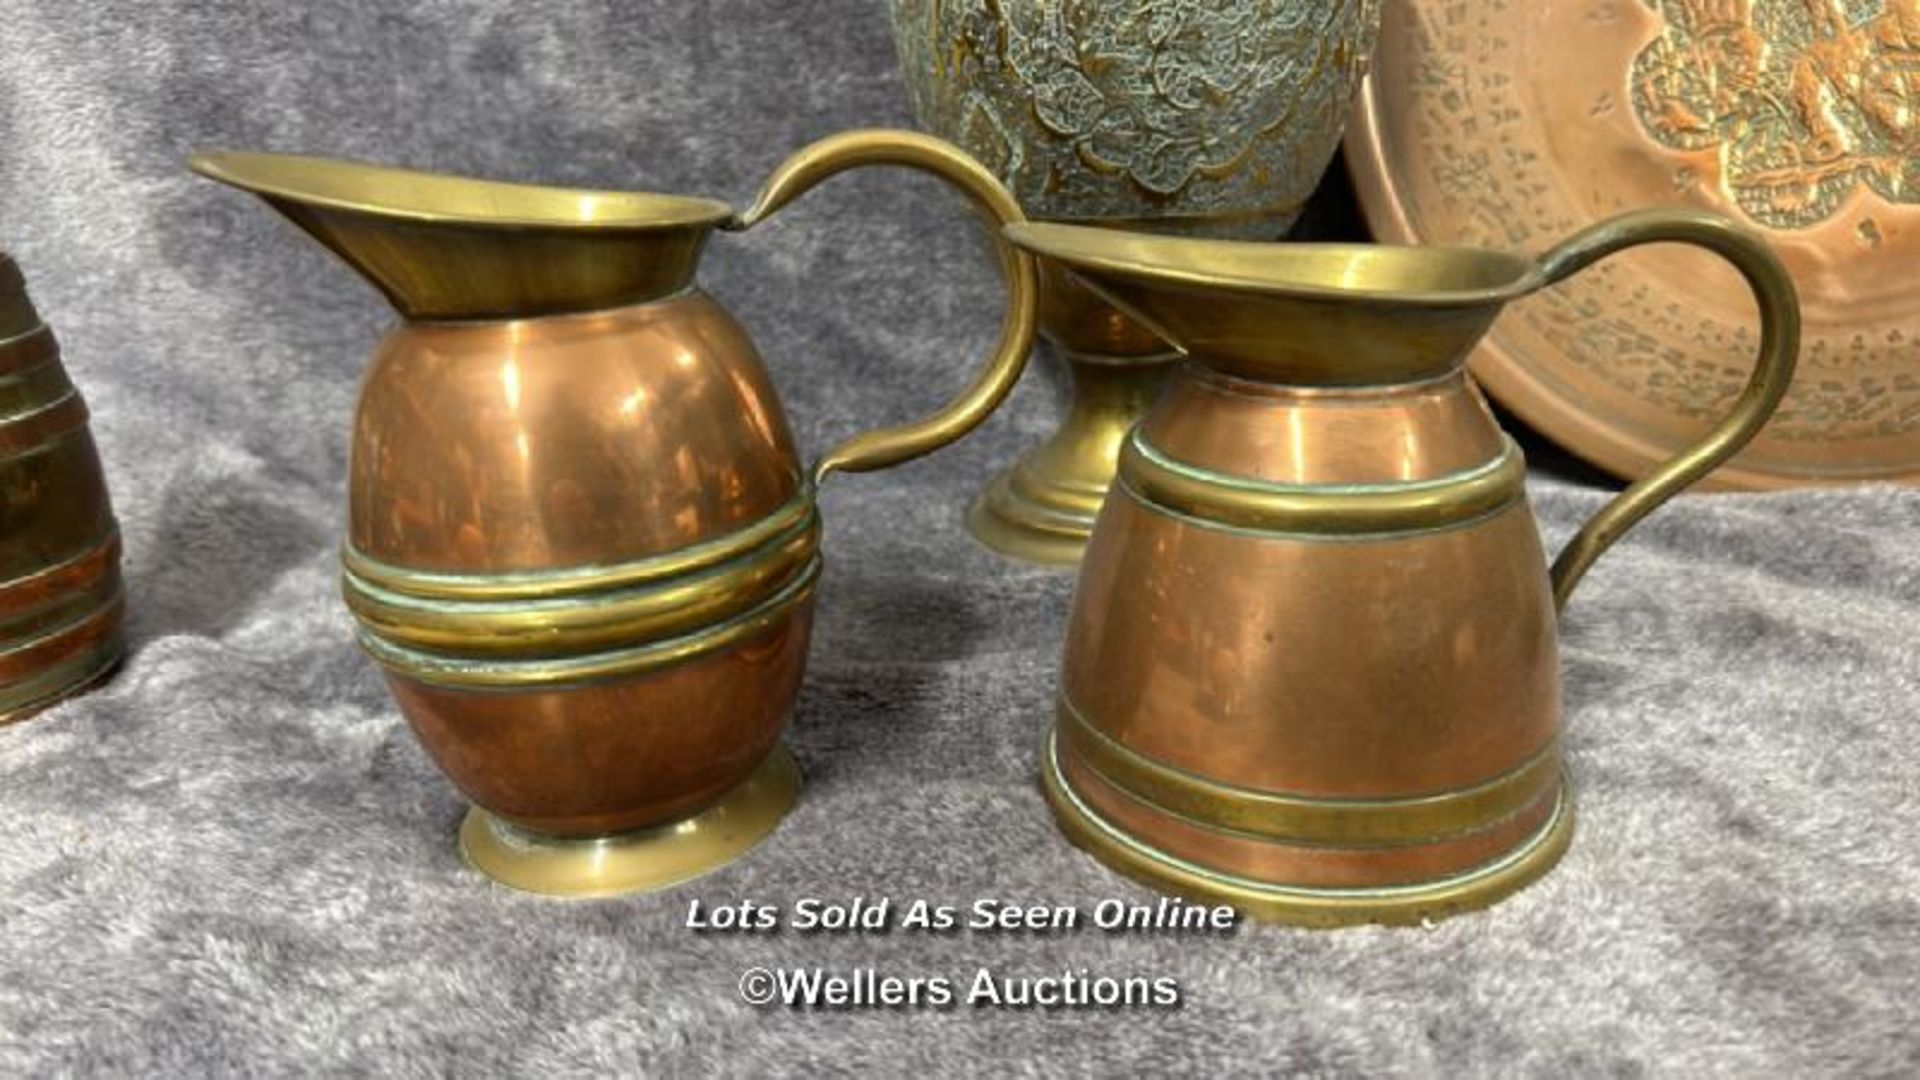 Brass ware including large vase (35cm high), pots, jugs and trays / AN14 - Image 4 of 6